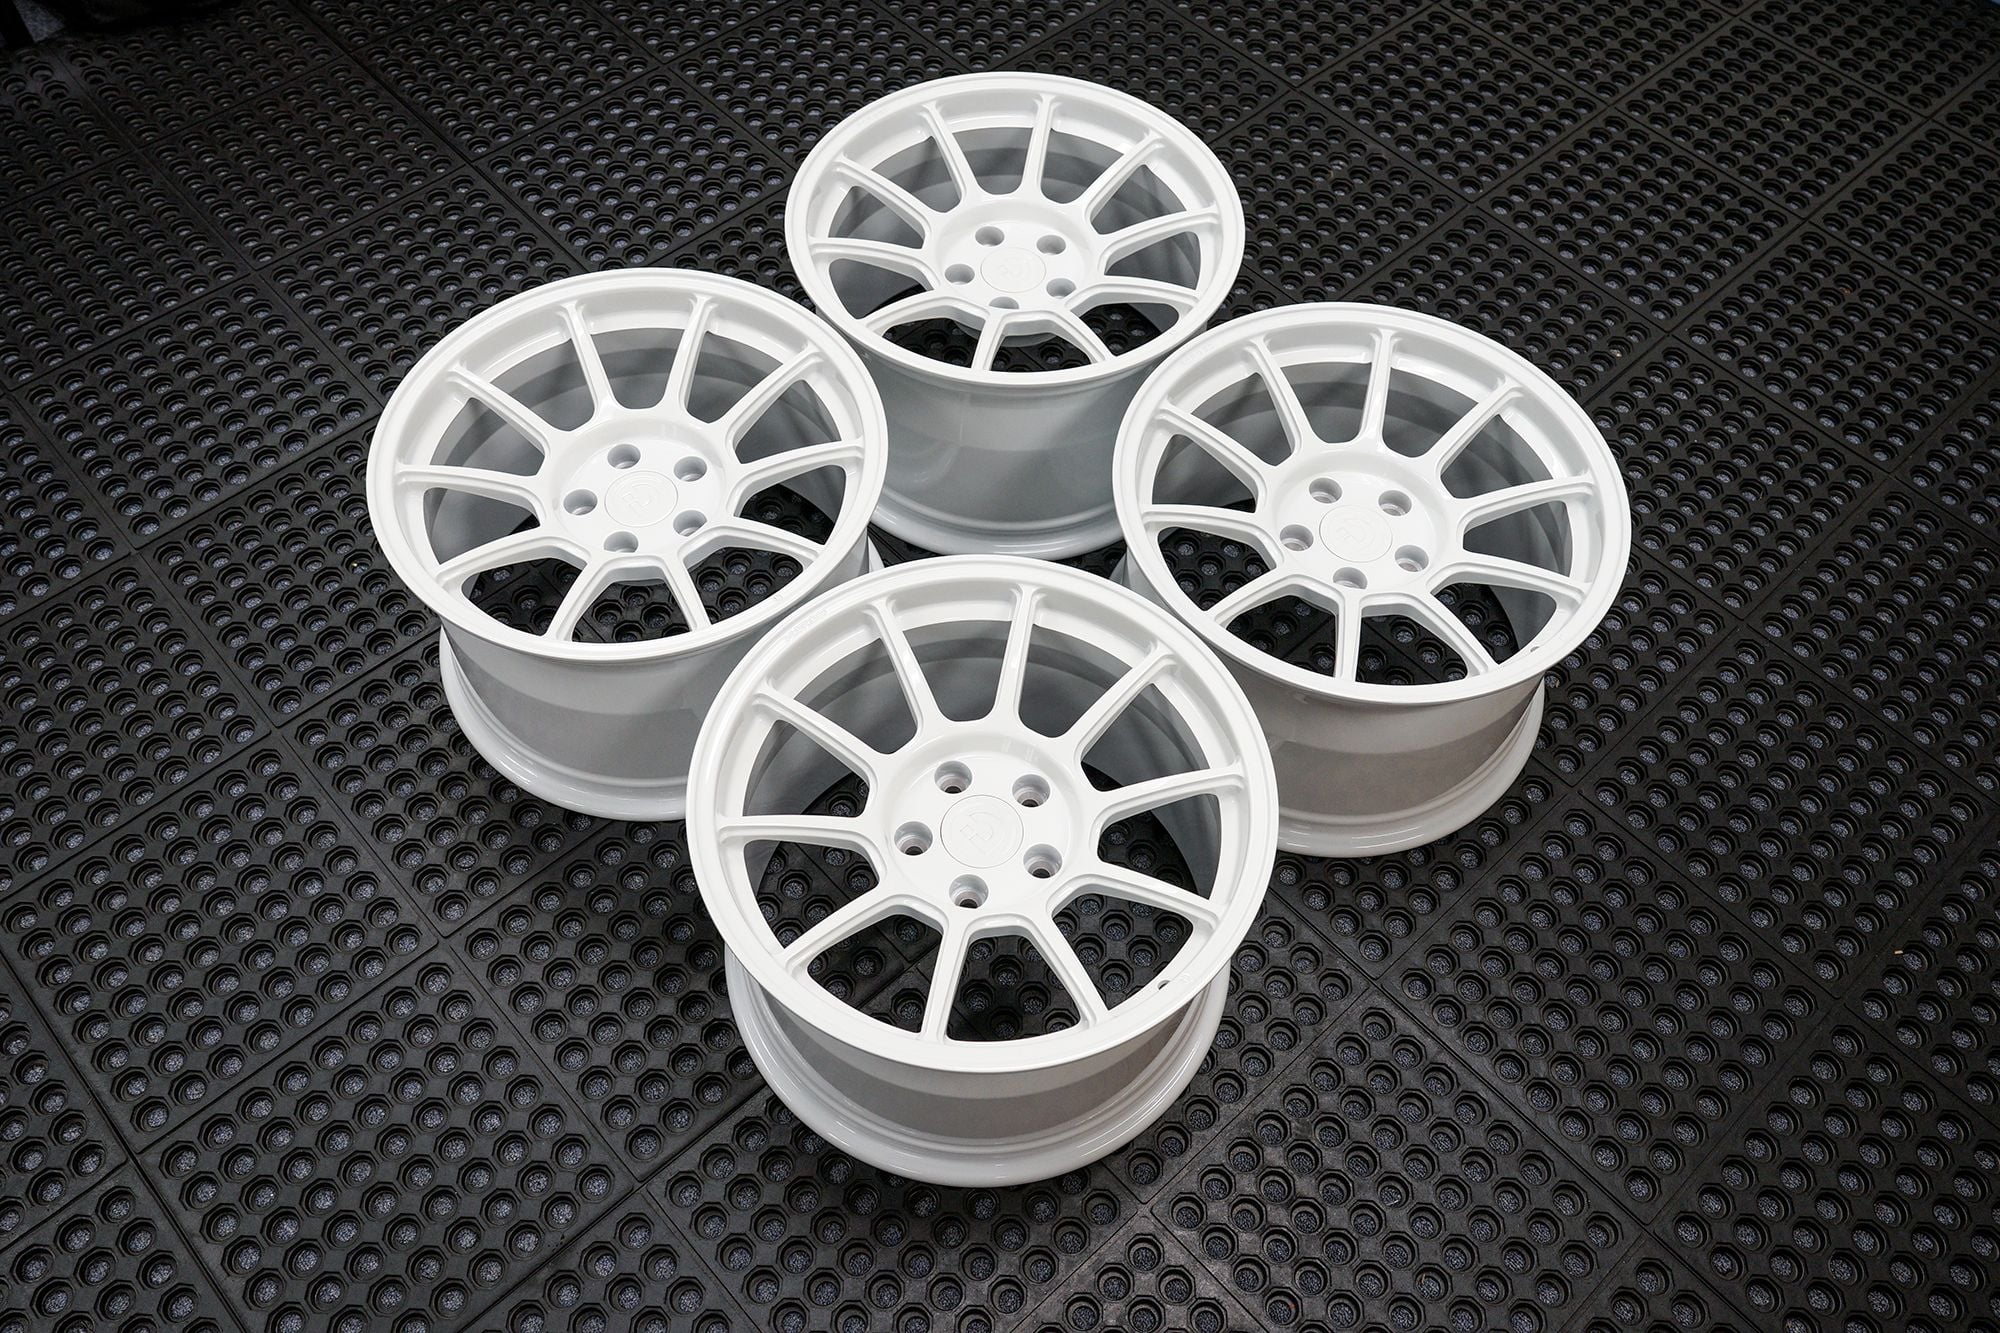 S650 Mustang iD Forged 18"- 20" Japanese Inspired 1pc Forged Wheels s_white_2_7a2ffbc092ced2d176870824861d24dcbe62ce20